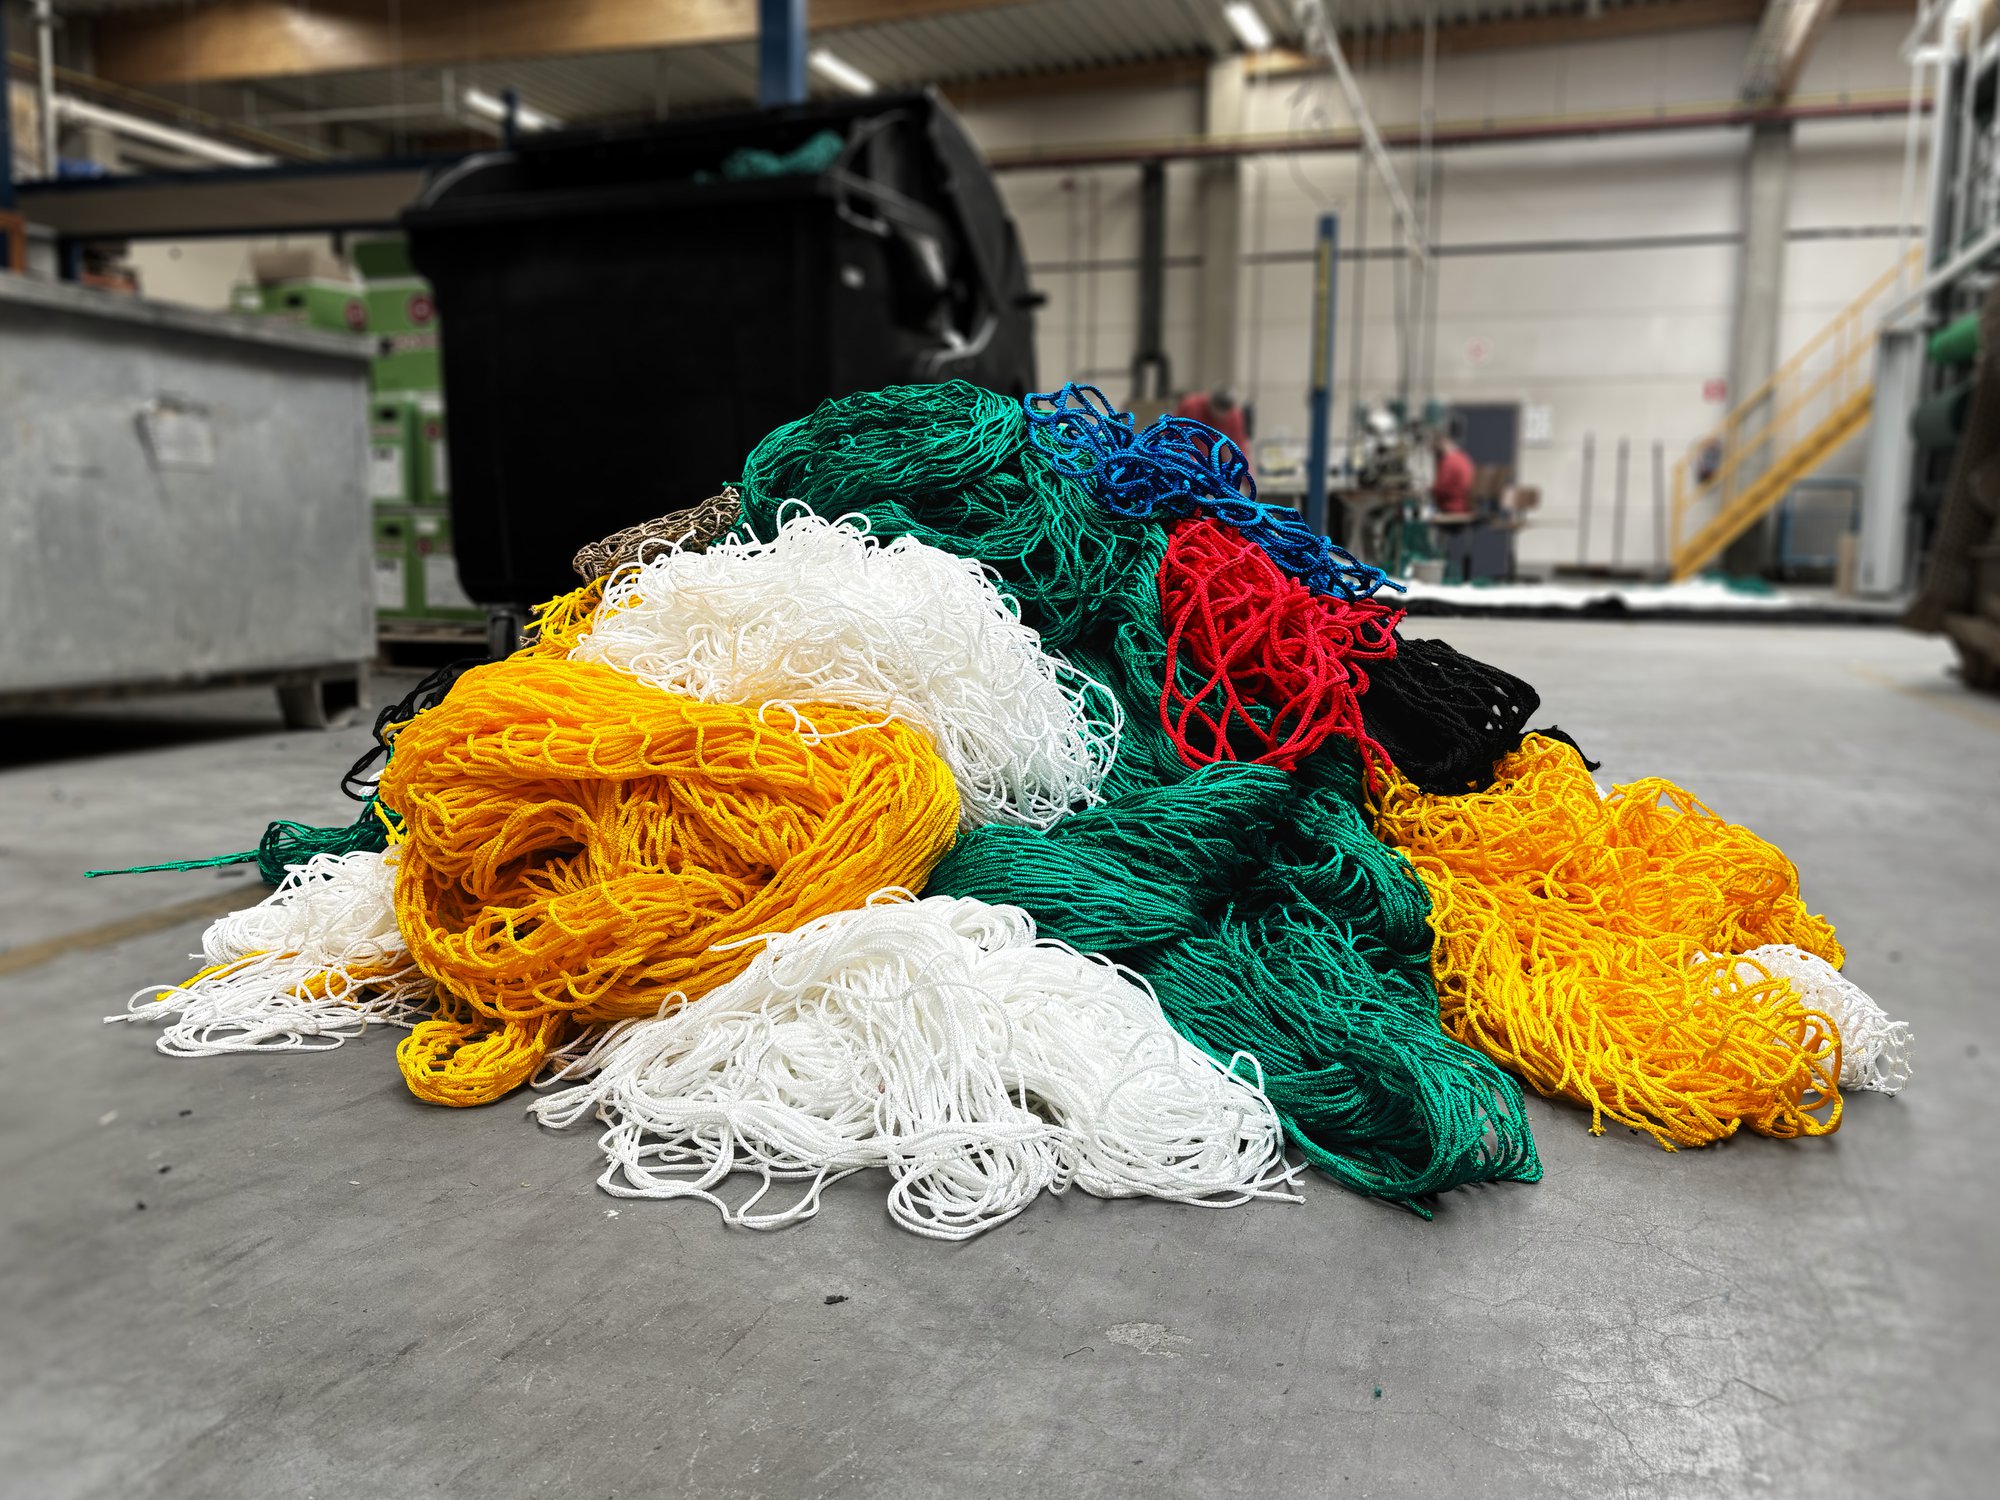 How Duranet recycles cutting waste